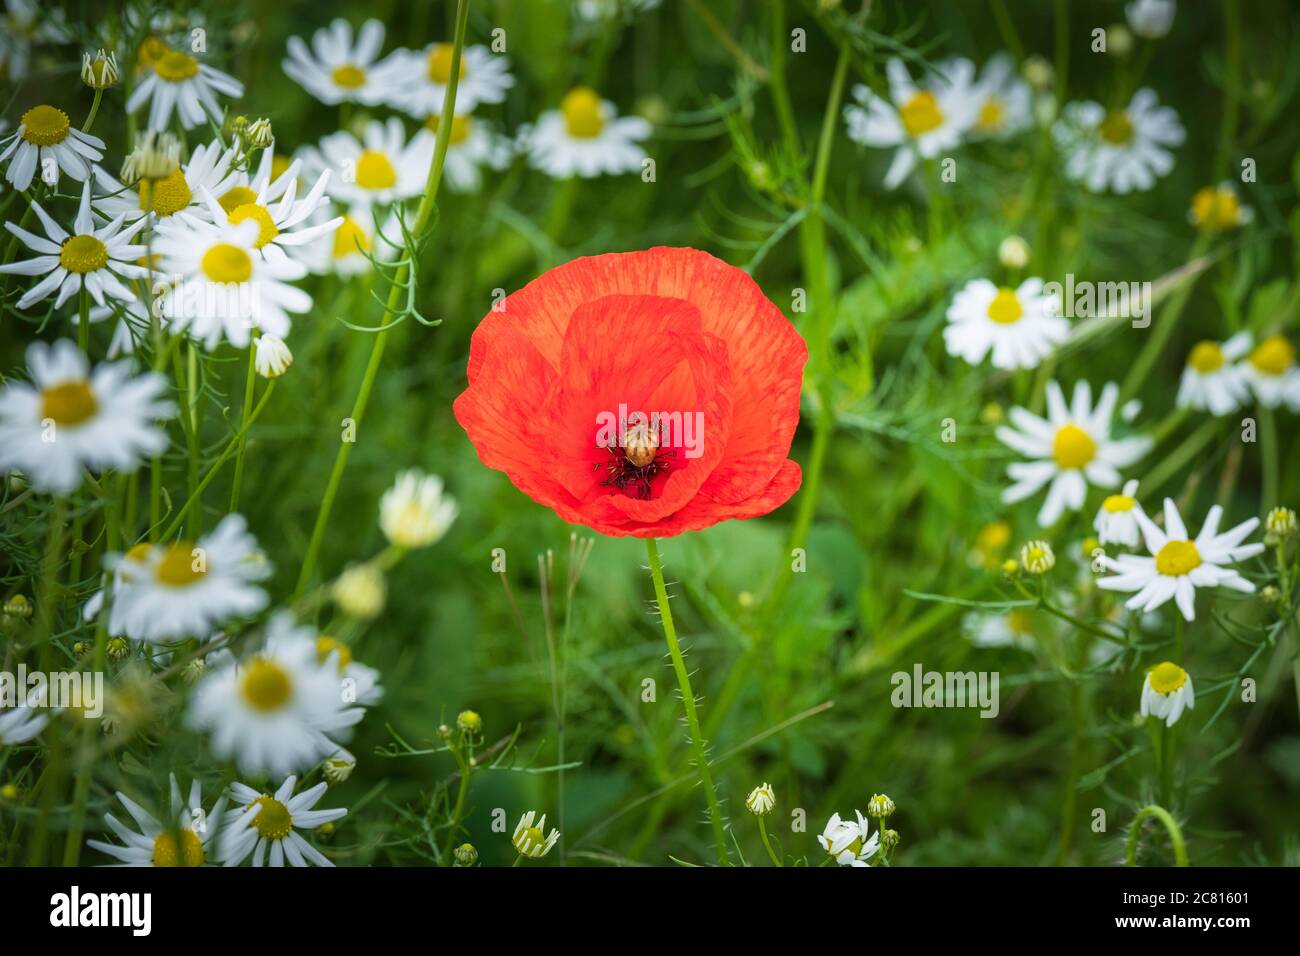 Poppies - common wild flowers / weeds in summer farmland in the English countryside the common poppy Papaver rhoeas Stock Photo